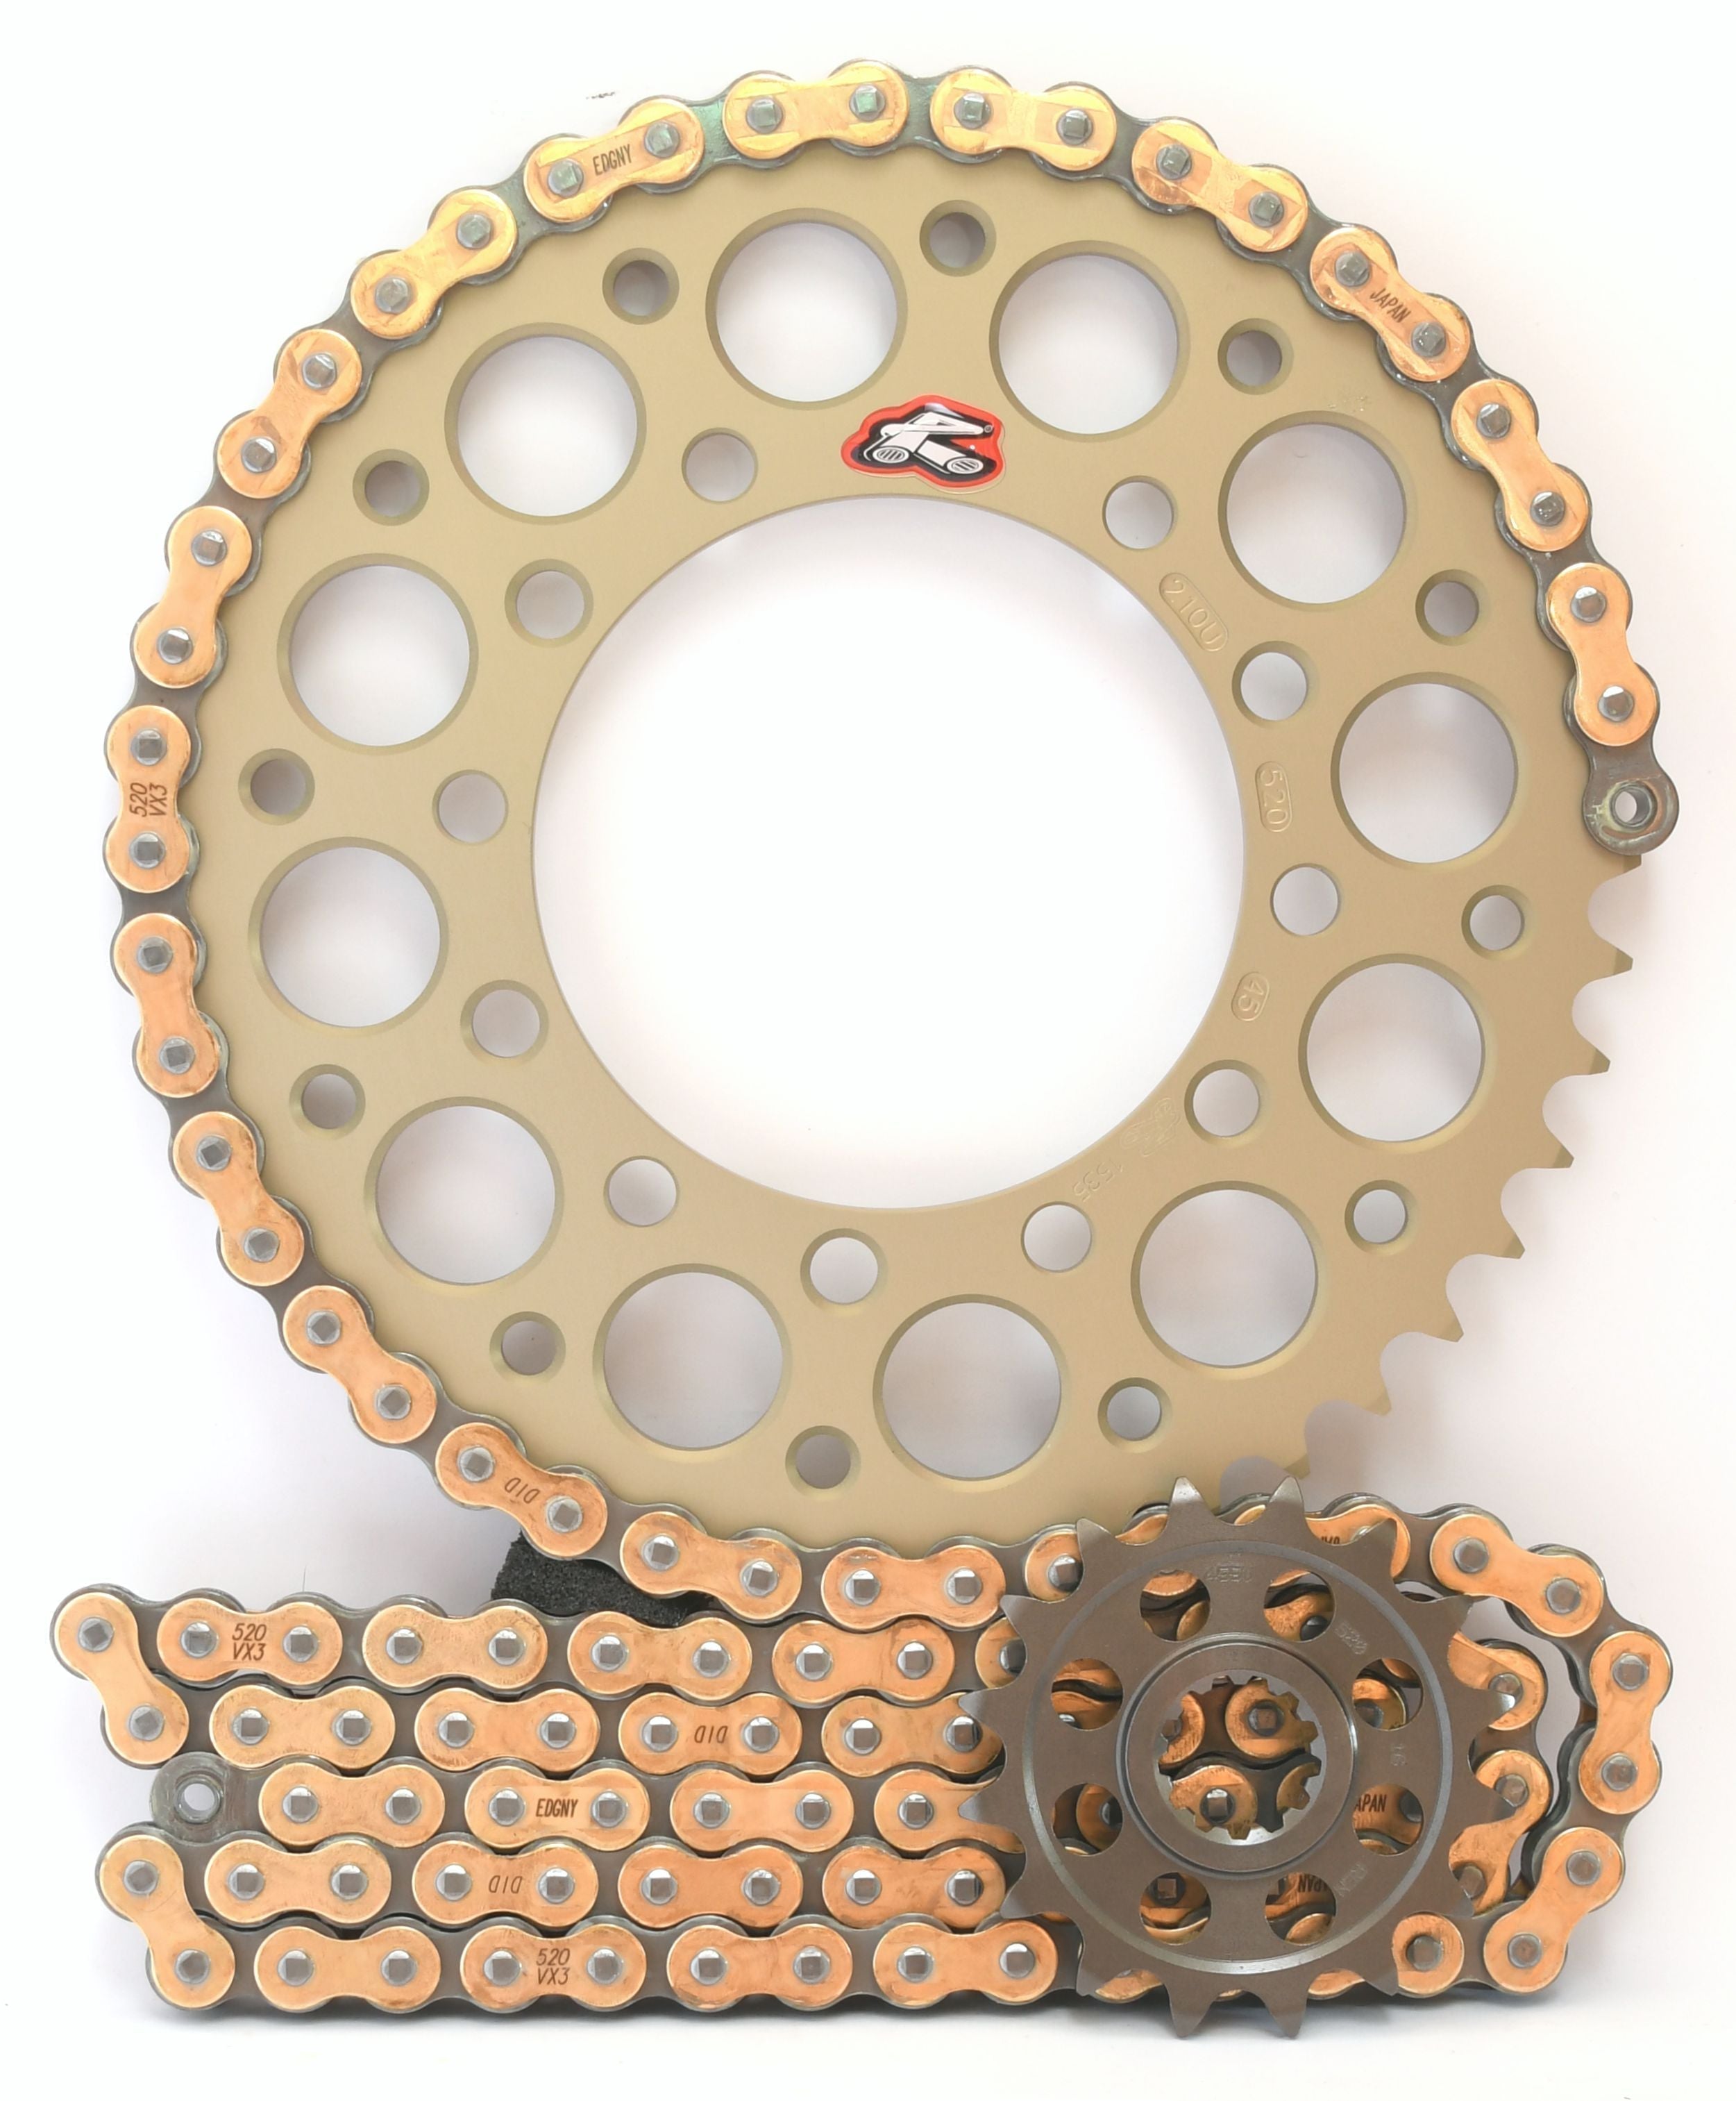 Renthal Ultralight and DID Chain & Sprocket Kit 520 Conversion for Triumph Street Triple 2013-2016 - Standard Gearing